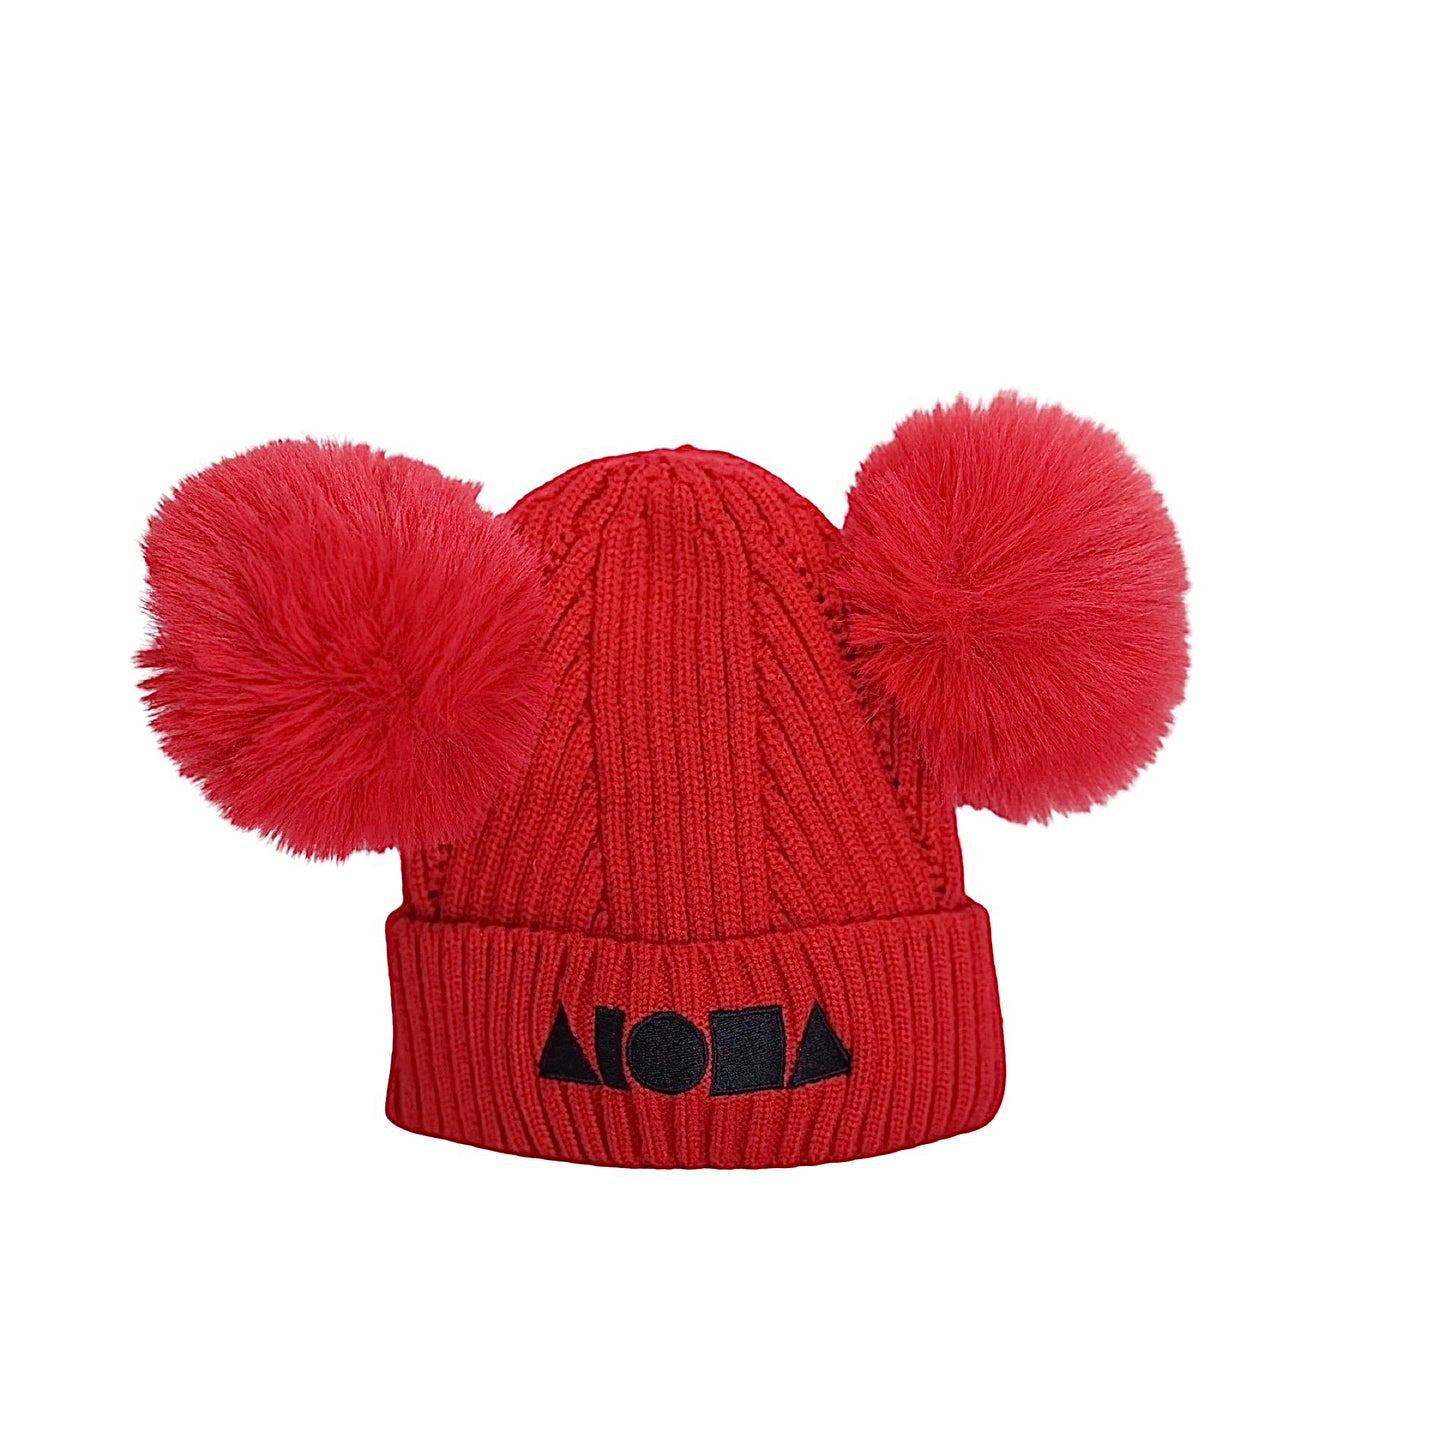 Aloha Shapes Red Puffs Youth Beanie